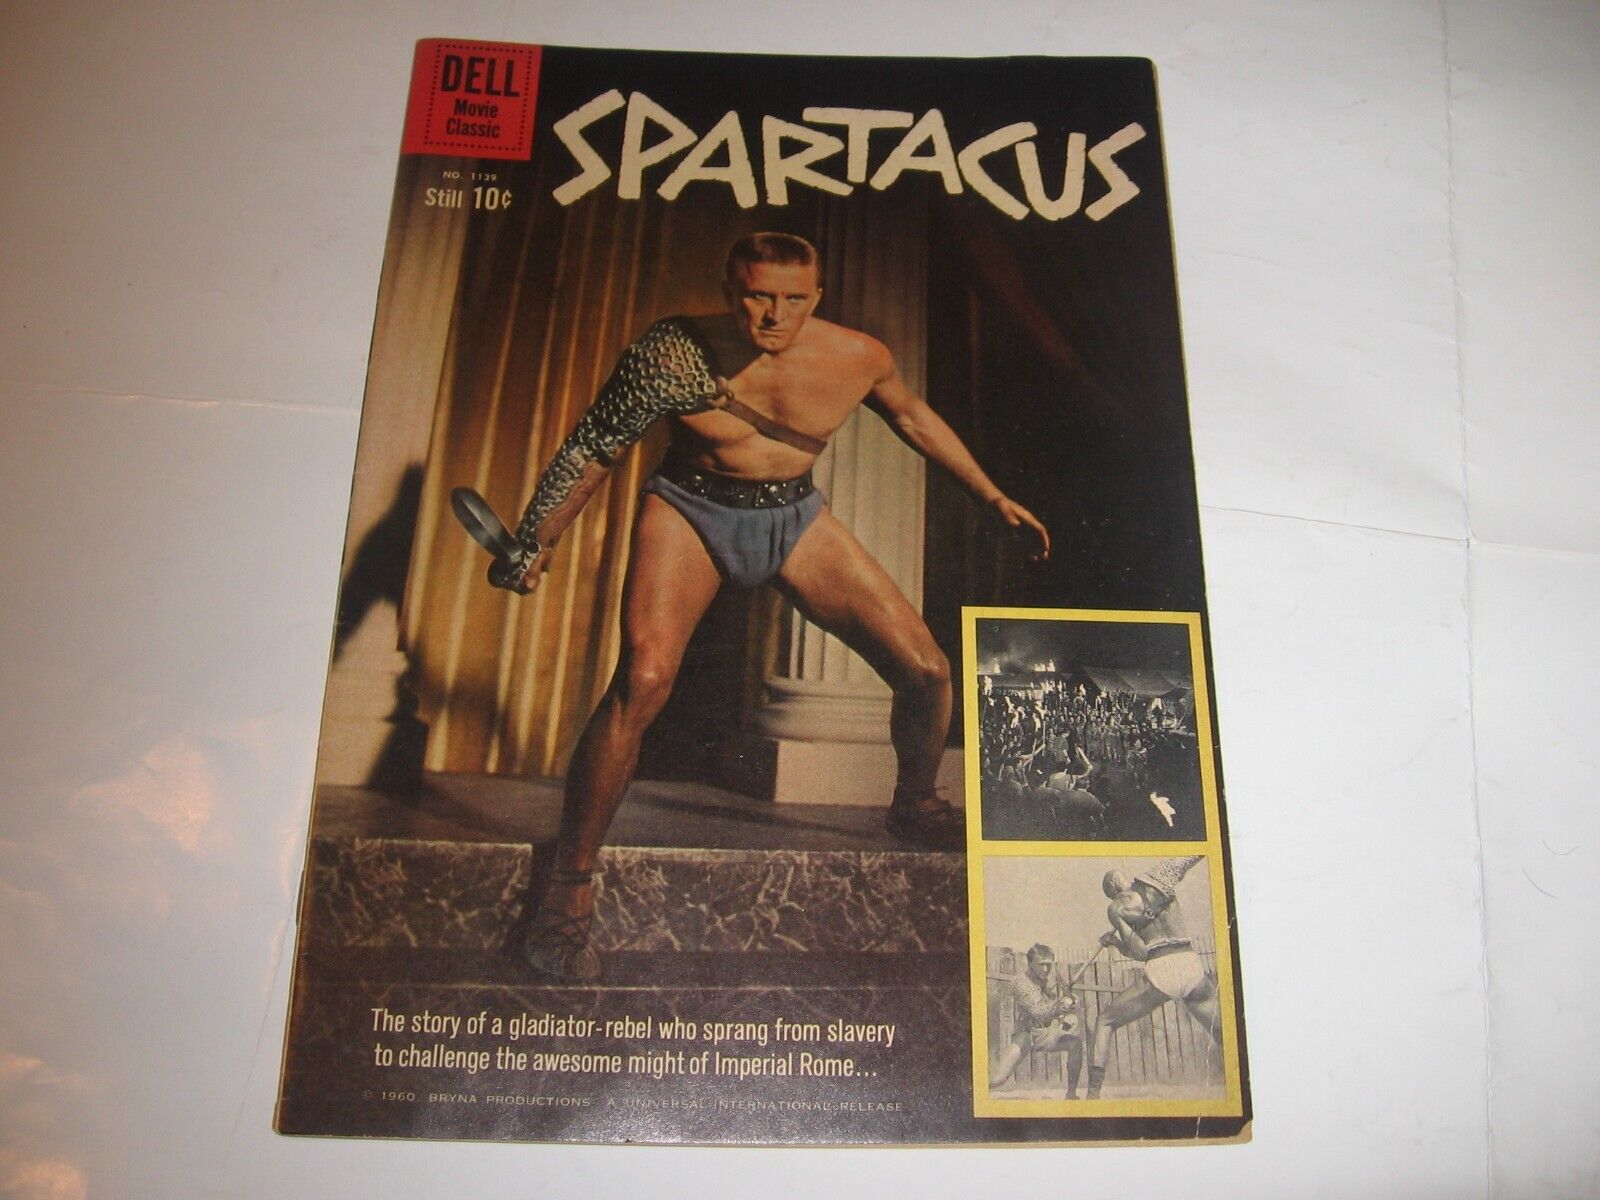 SPARTACUS #1139, VG/FN, Dell, 1960, Movie Classic, Kirk Douglas